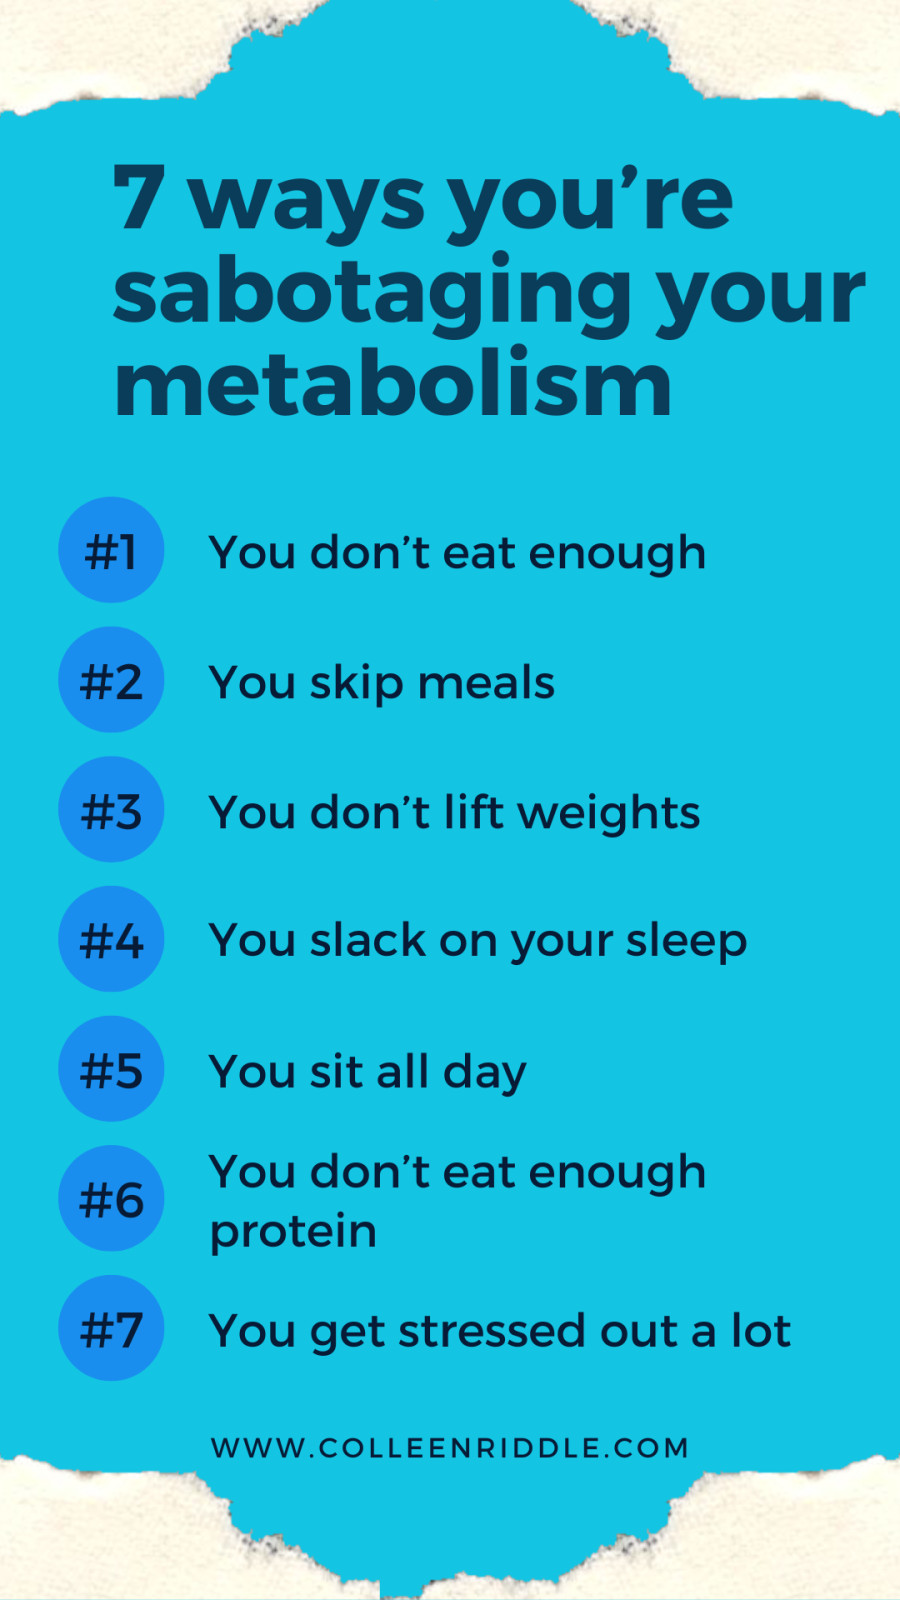 7 Habits that Wreck Your Metabolism